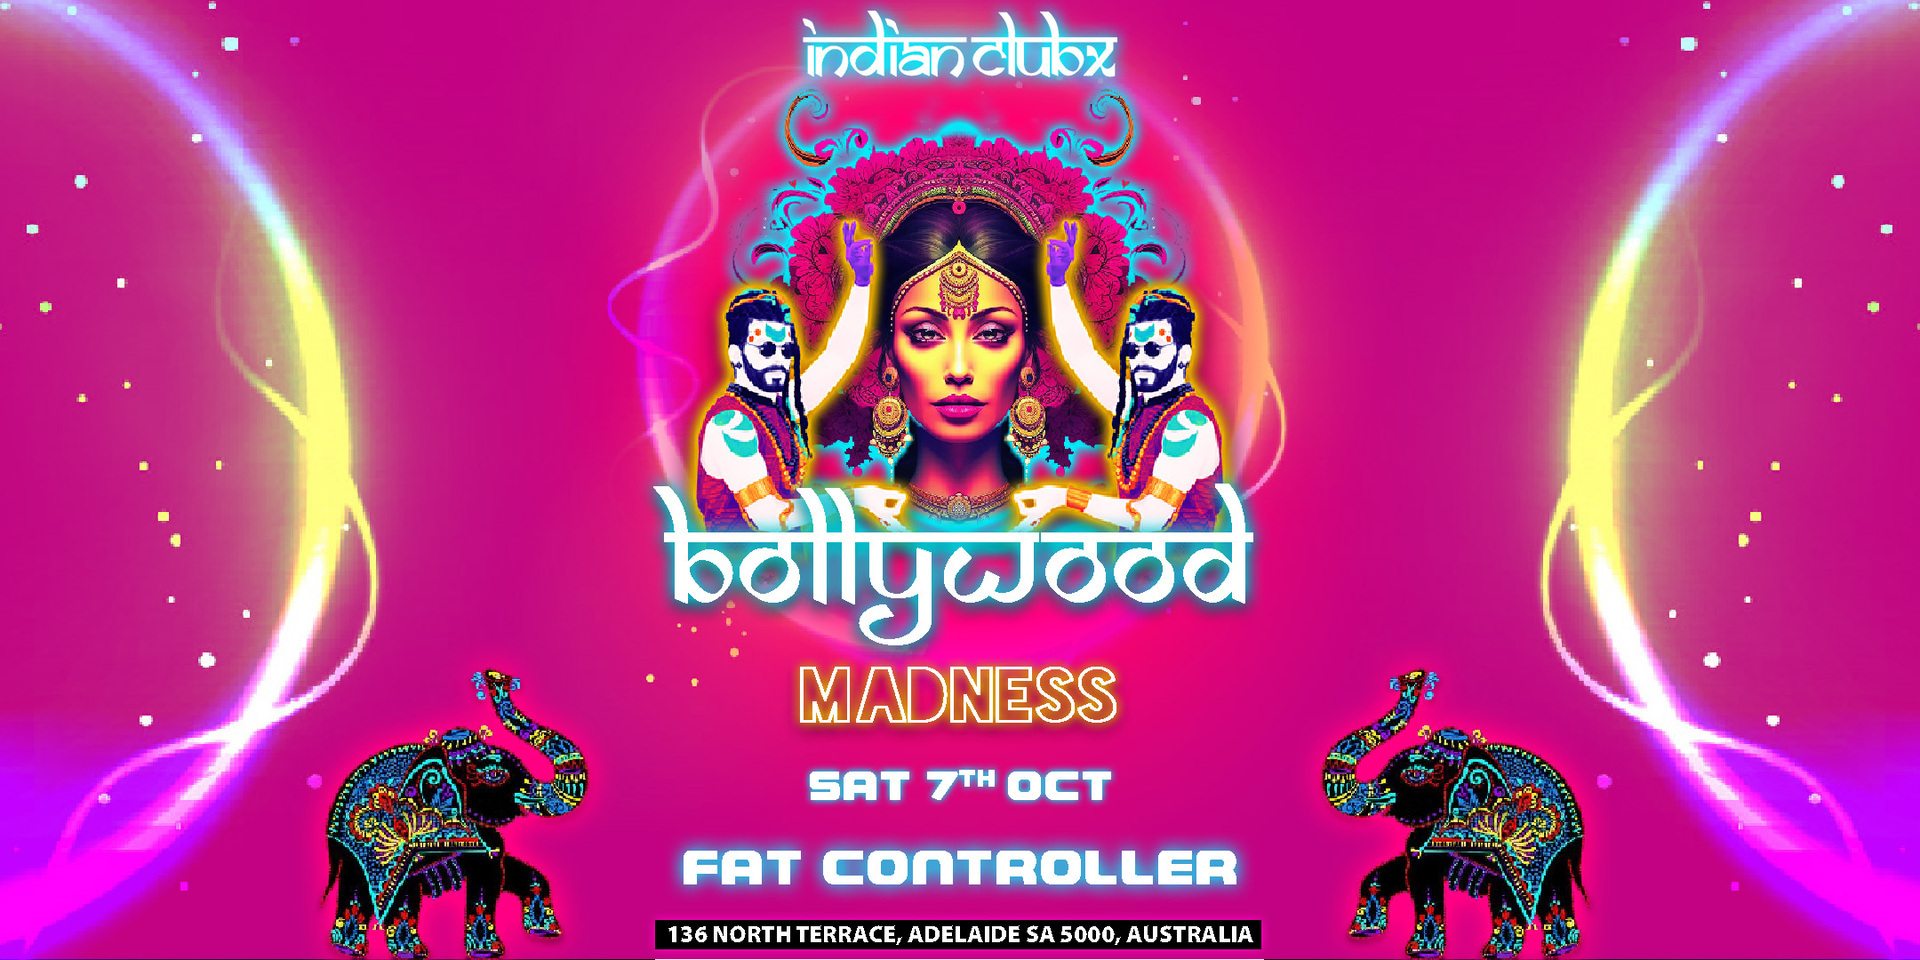 BOLLYWOOD MADNESS at Fat Controller, Adelaide, Adelaide, South Australia, Australia